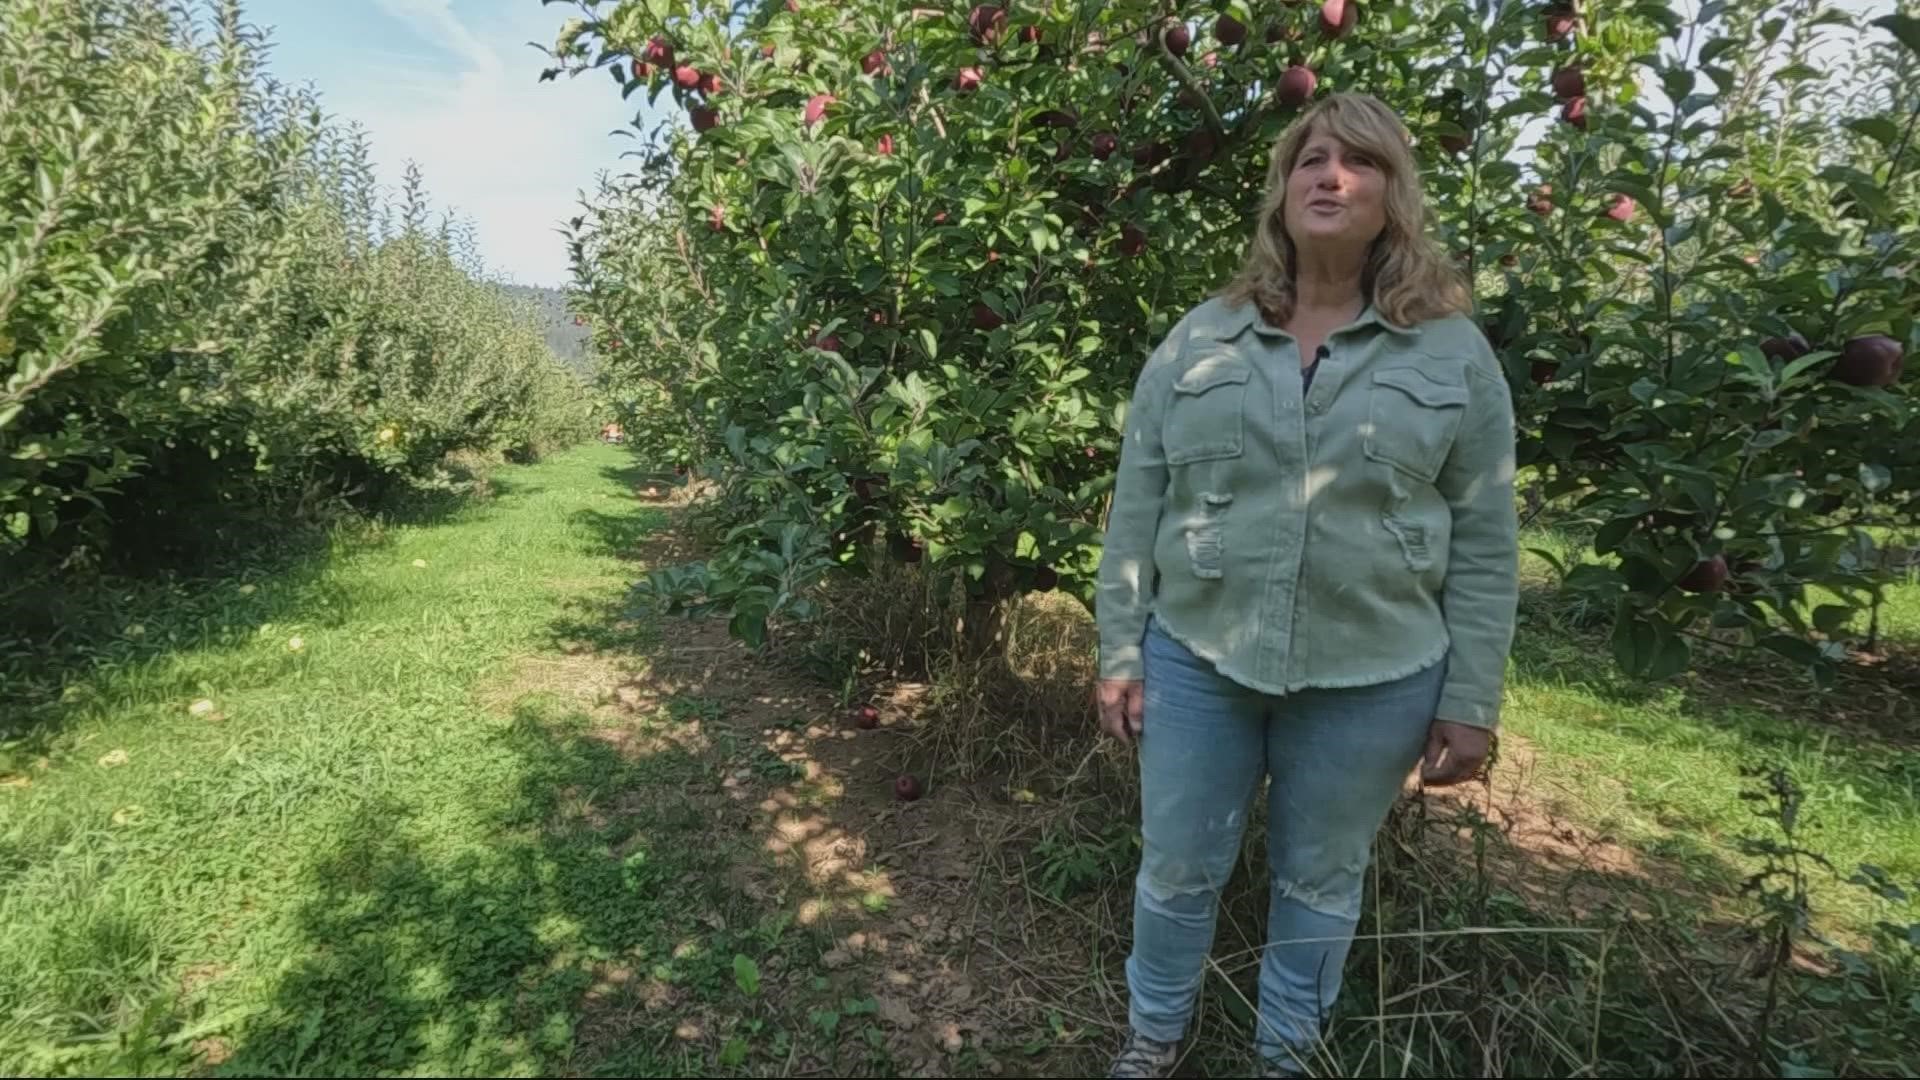 This week for Let's Get Out There, our host visits Draper Girls country farm in Hood River to go apple picking